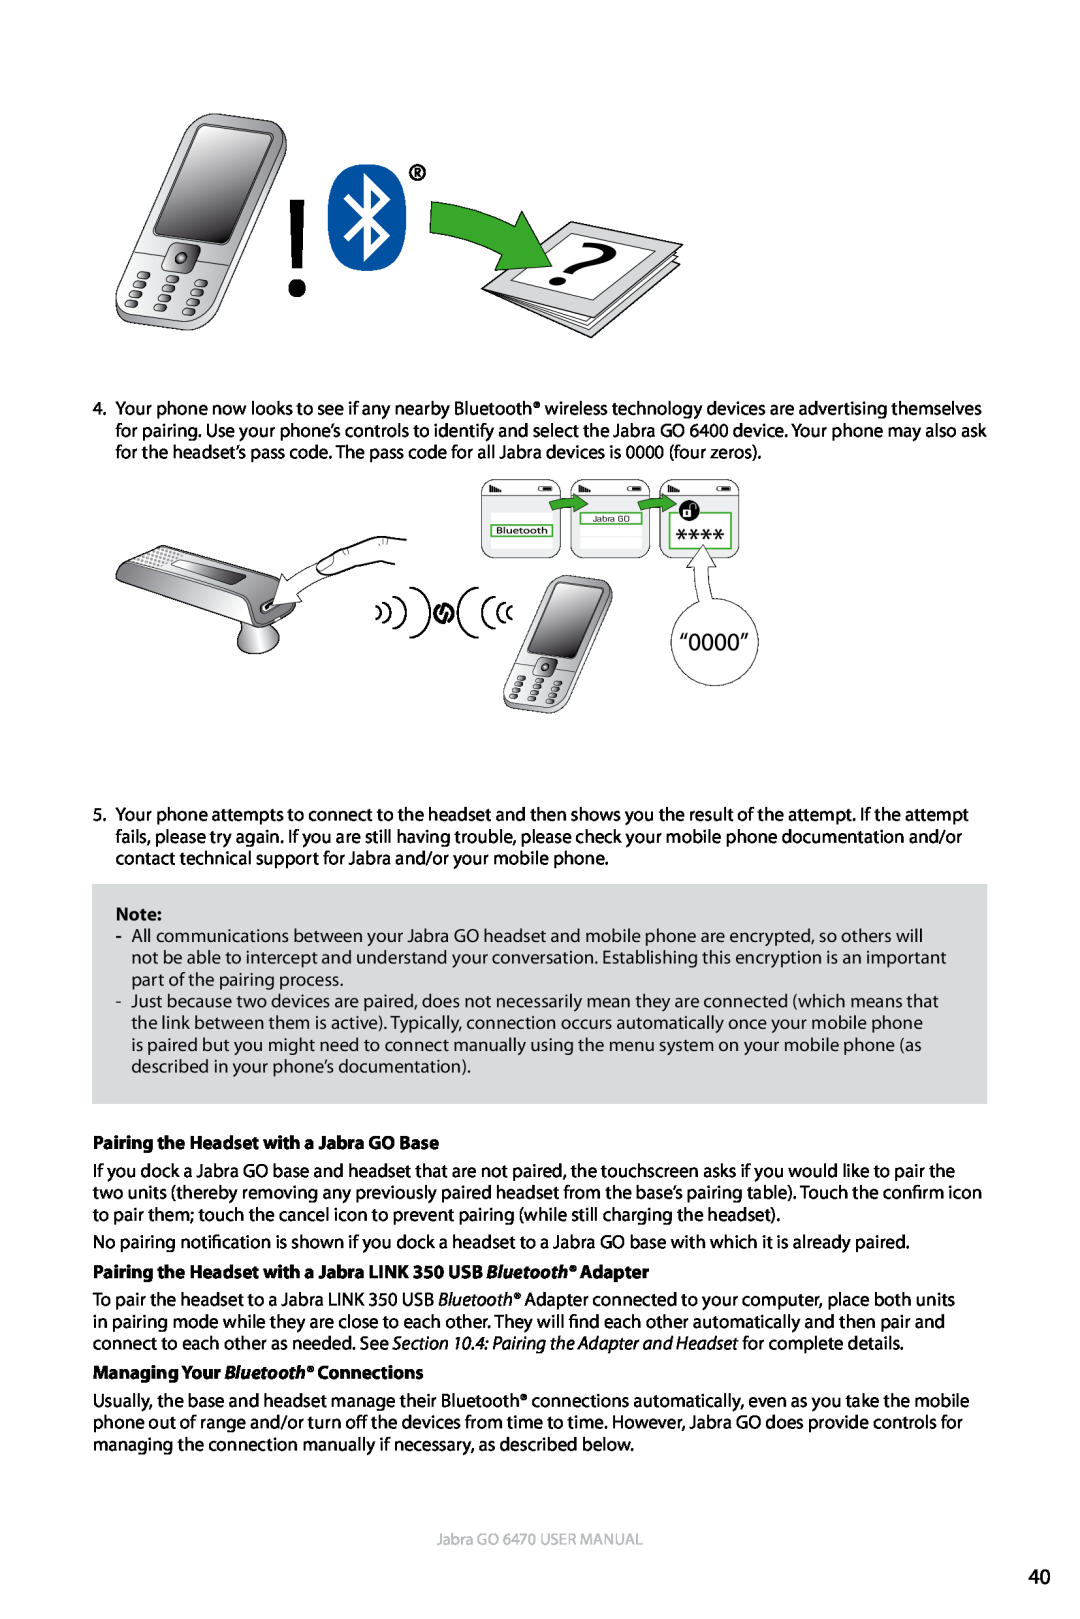 Jabra GO 6470 user manual Pairing the Headset with a Jabra GO Base, Managing Your Bluetooth Connections 